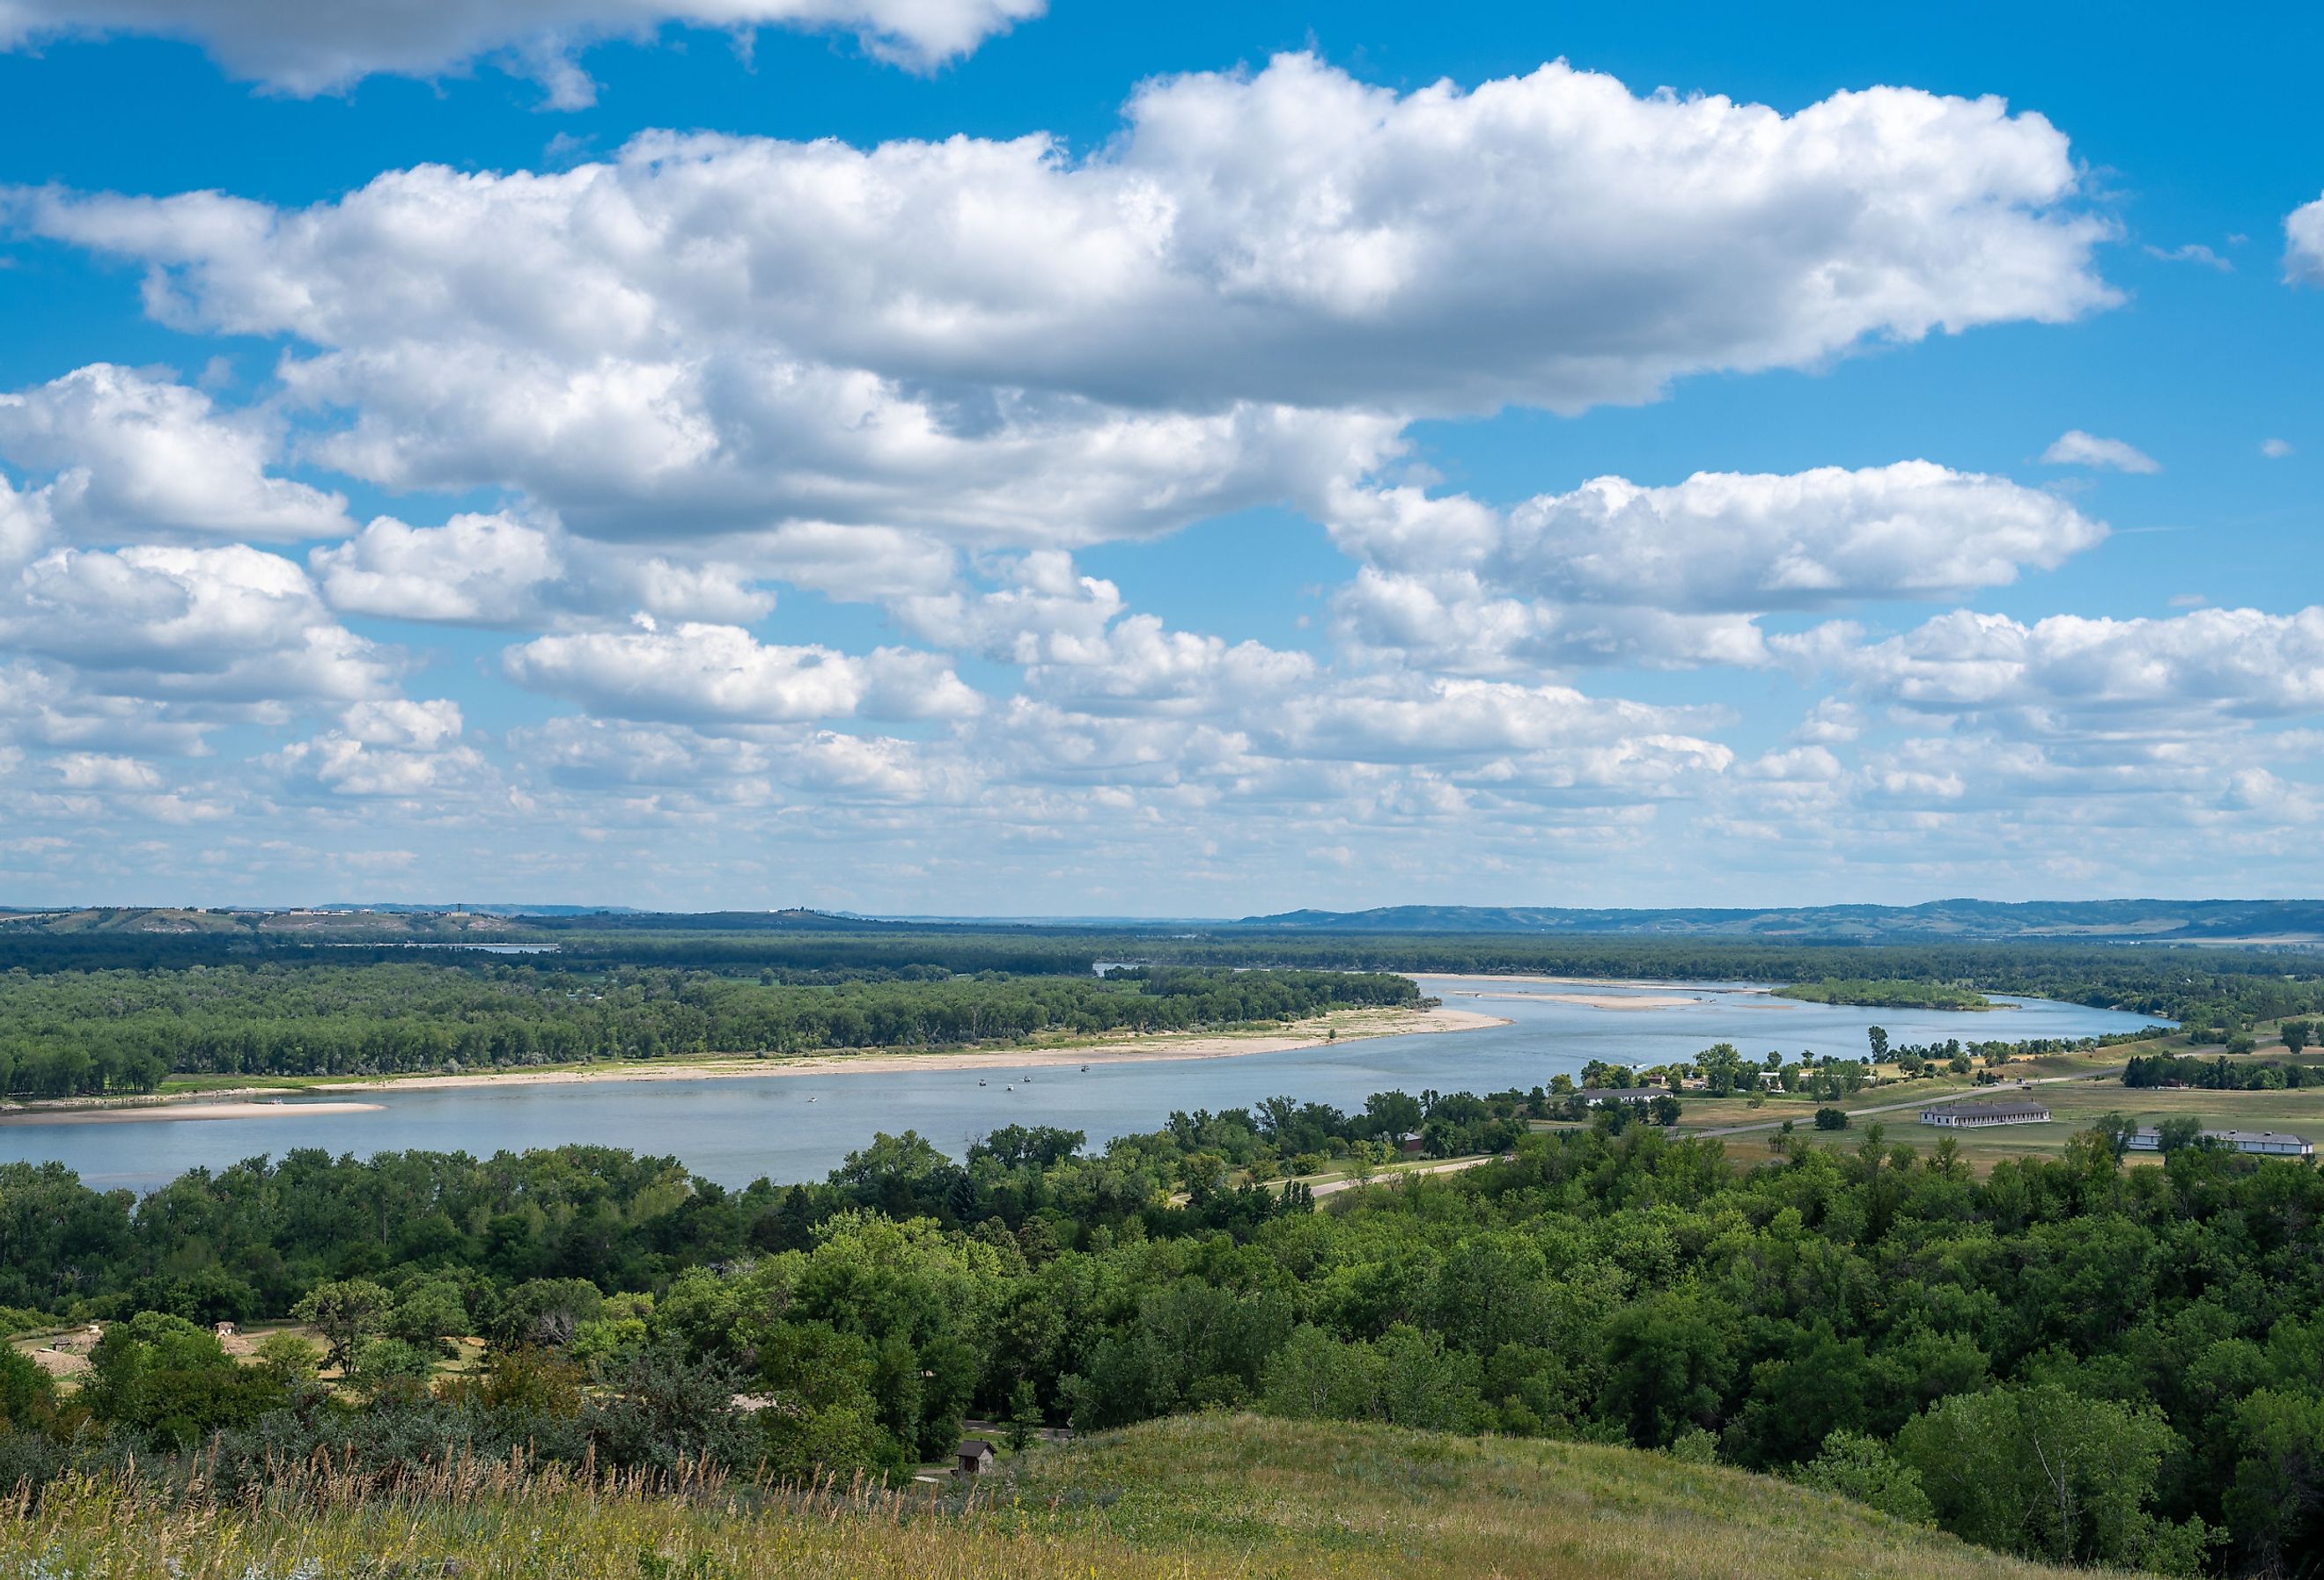 View of Missouri River Valley from Fort Ransom State Park in North Dakota.